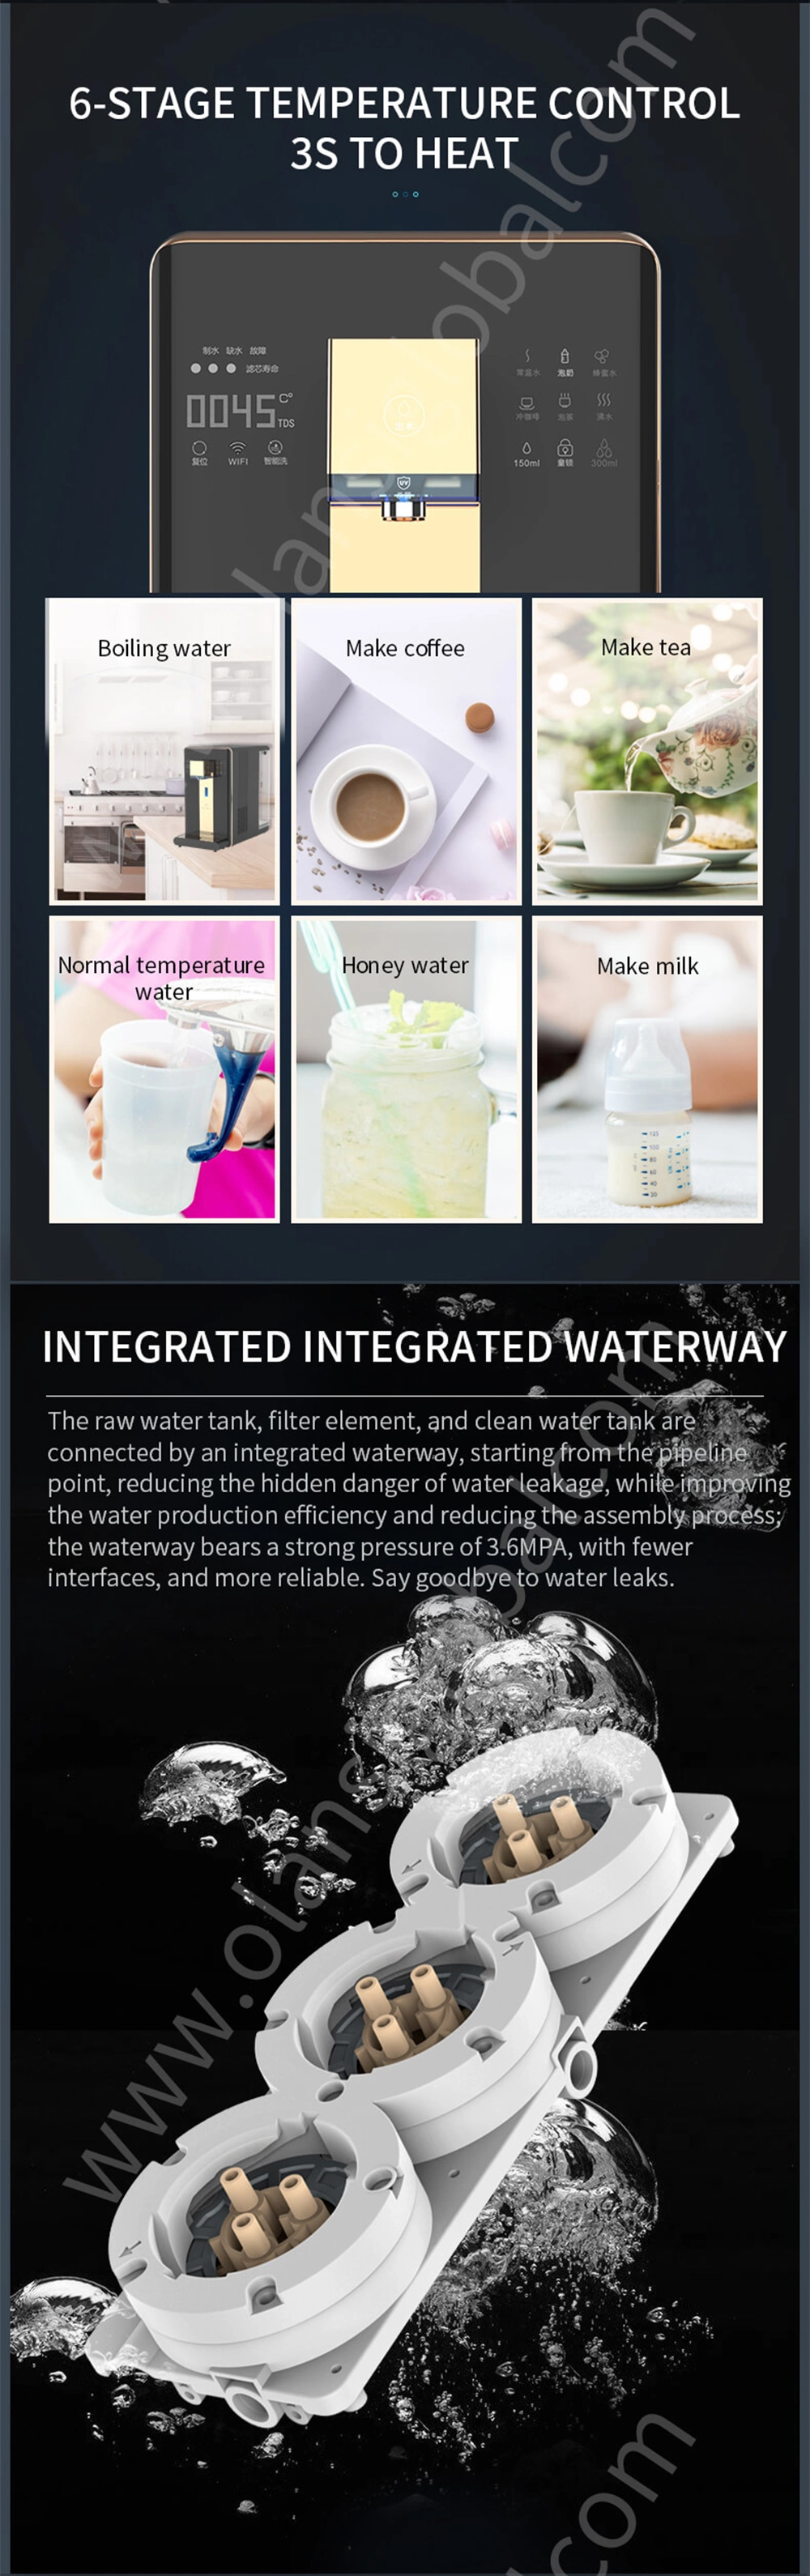 Olansi Desktop Instant Hot RO Water Purifier Free Installation Hydrogen Water Machine Reverse Osmosis System Hot and Cold Water Dispenser